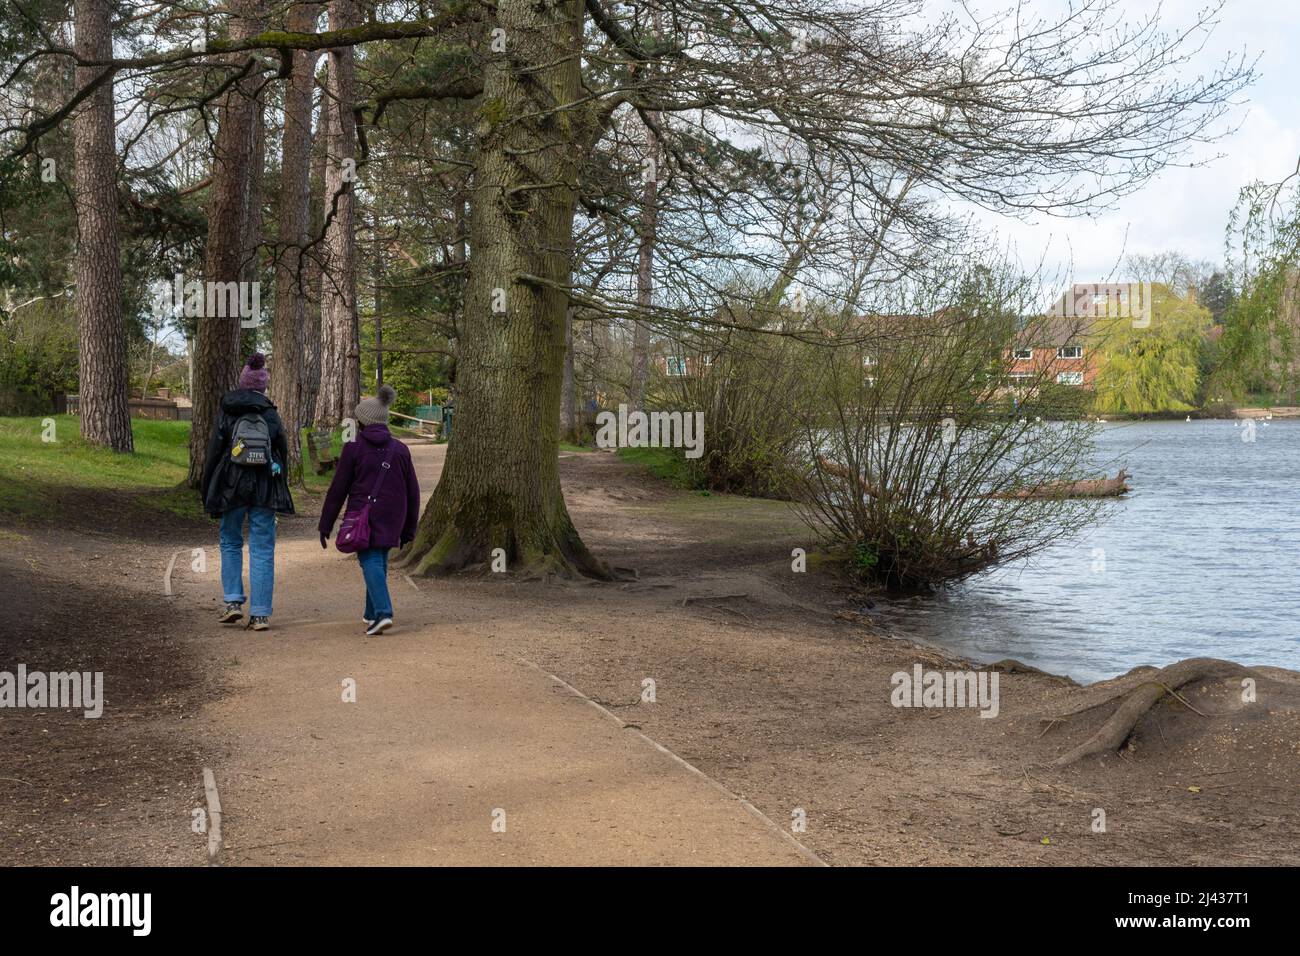 Petersfield Heath Pond, a visitor attraction and wildlife site in Hampshire, England, UK, with people walking on a footpath around the  pond Stock Photo